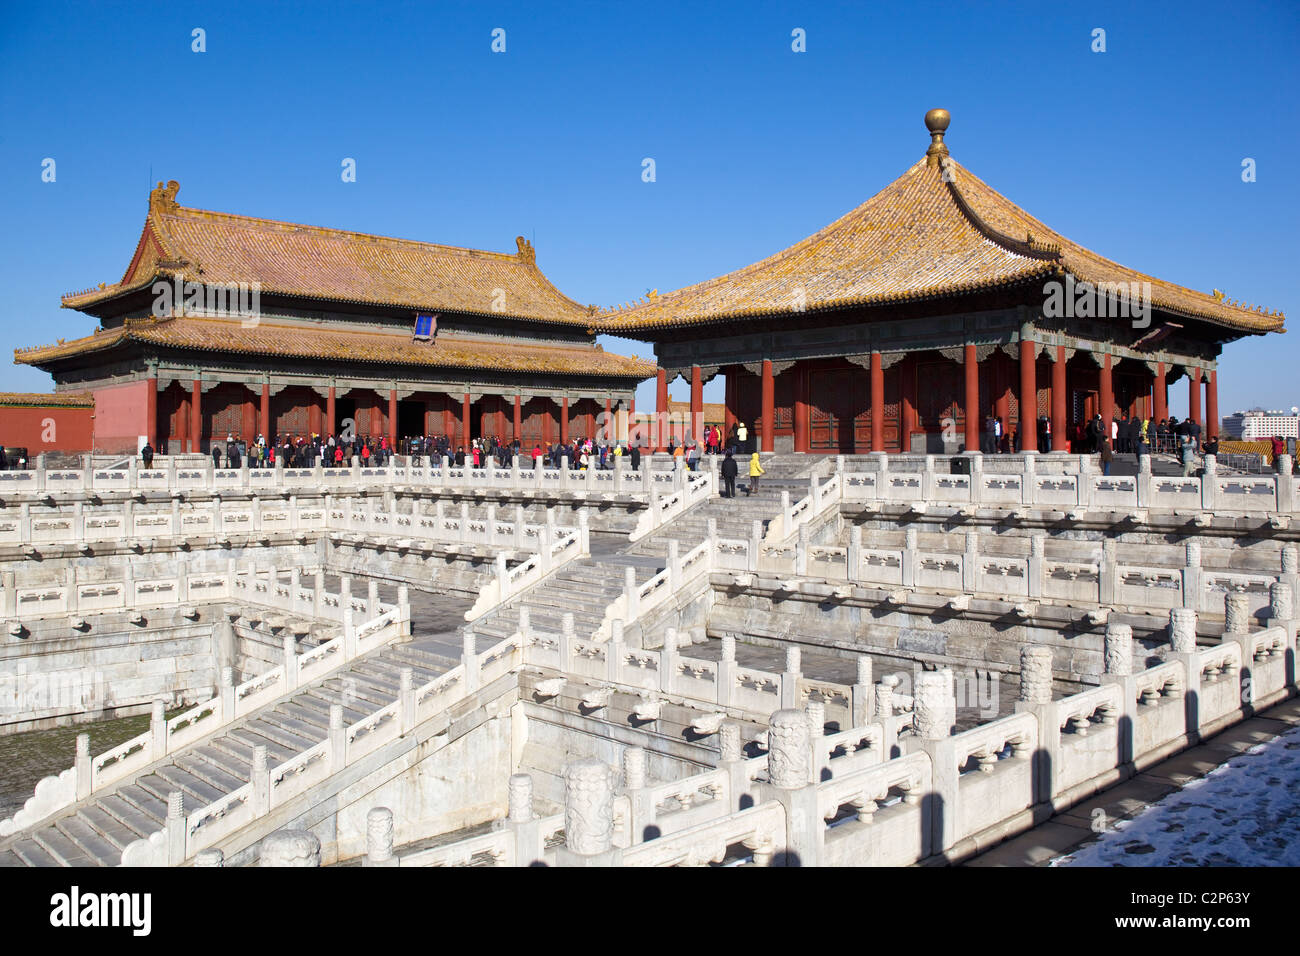 Bao il Dian Hall Imperial Palace Forbidden City Beijing Chine Banque D'Images